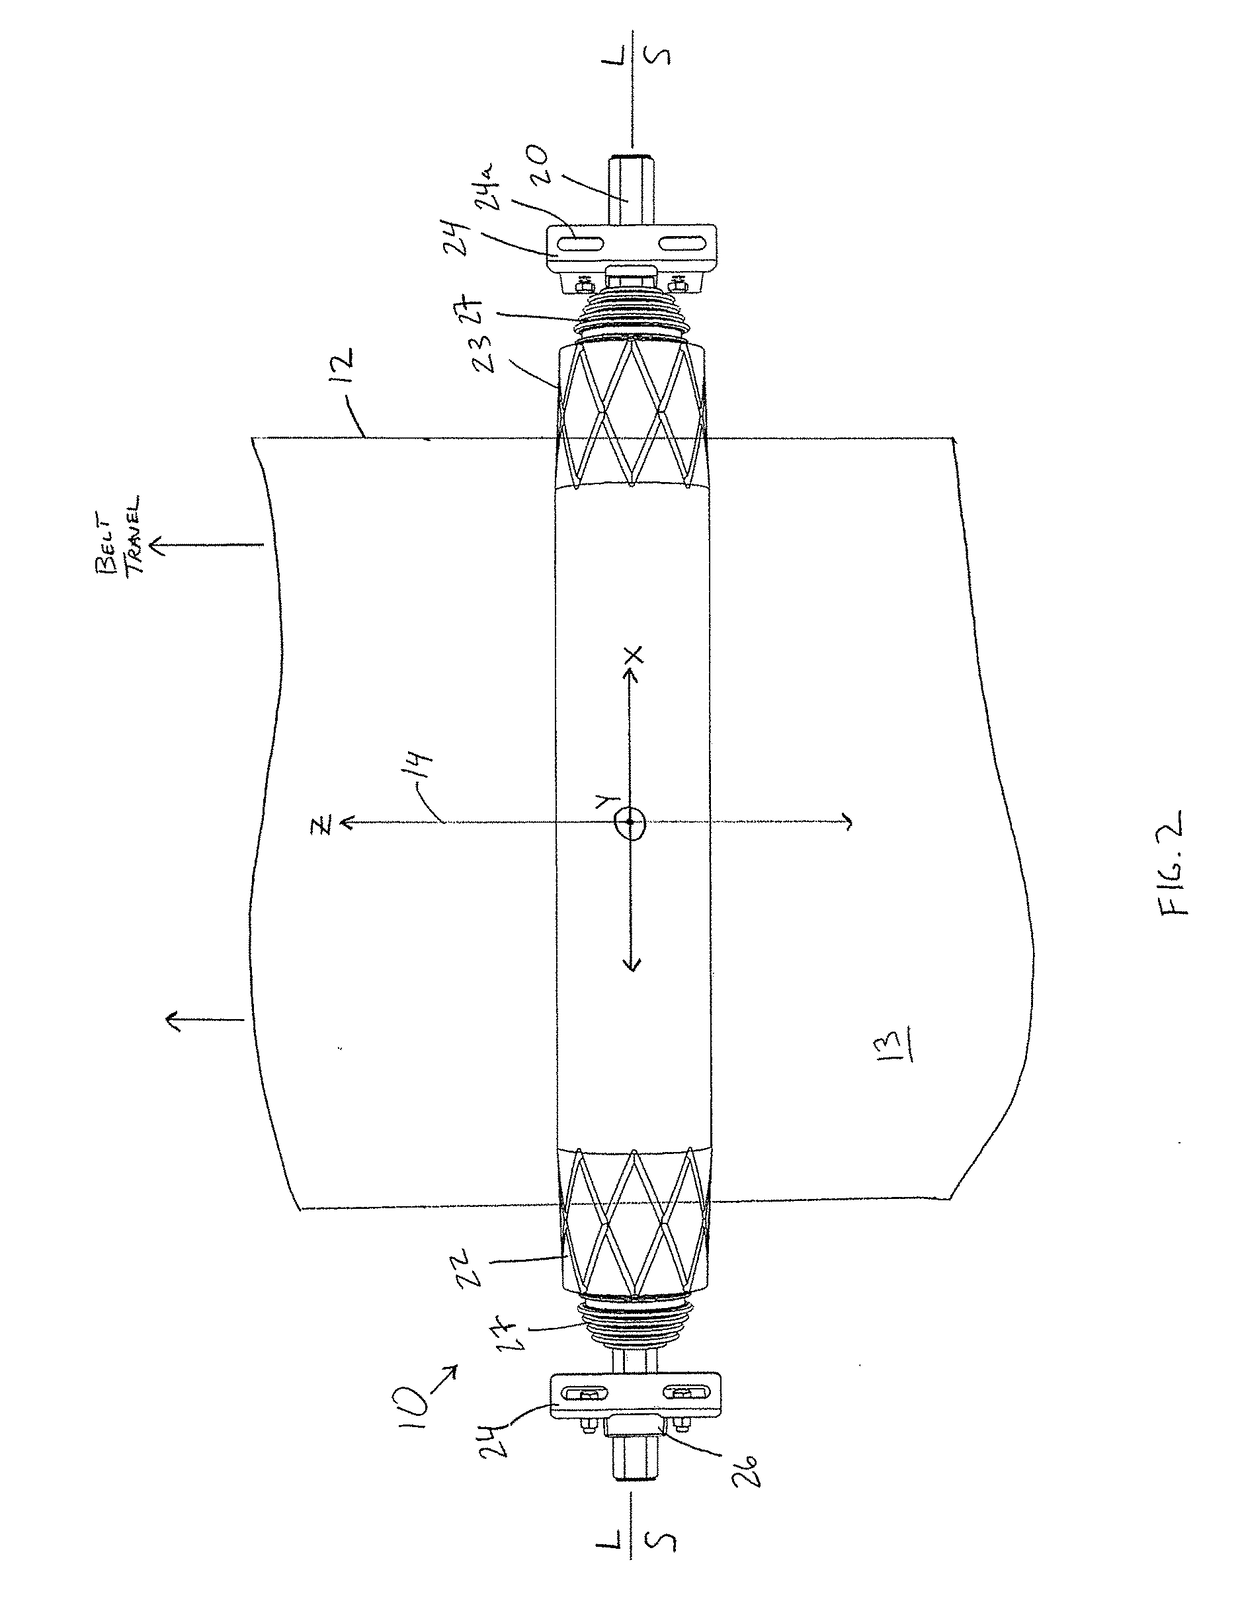 Apparatus and Method for Tracking Conveyor Belts